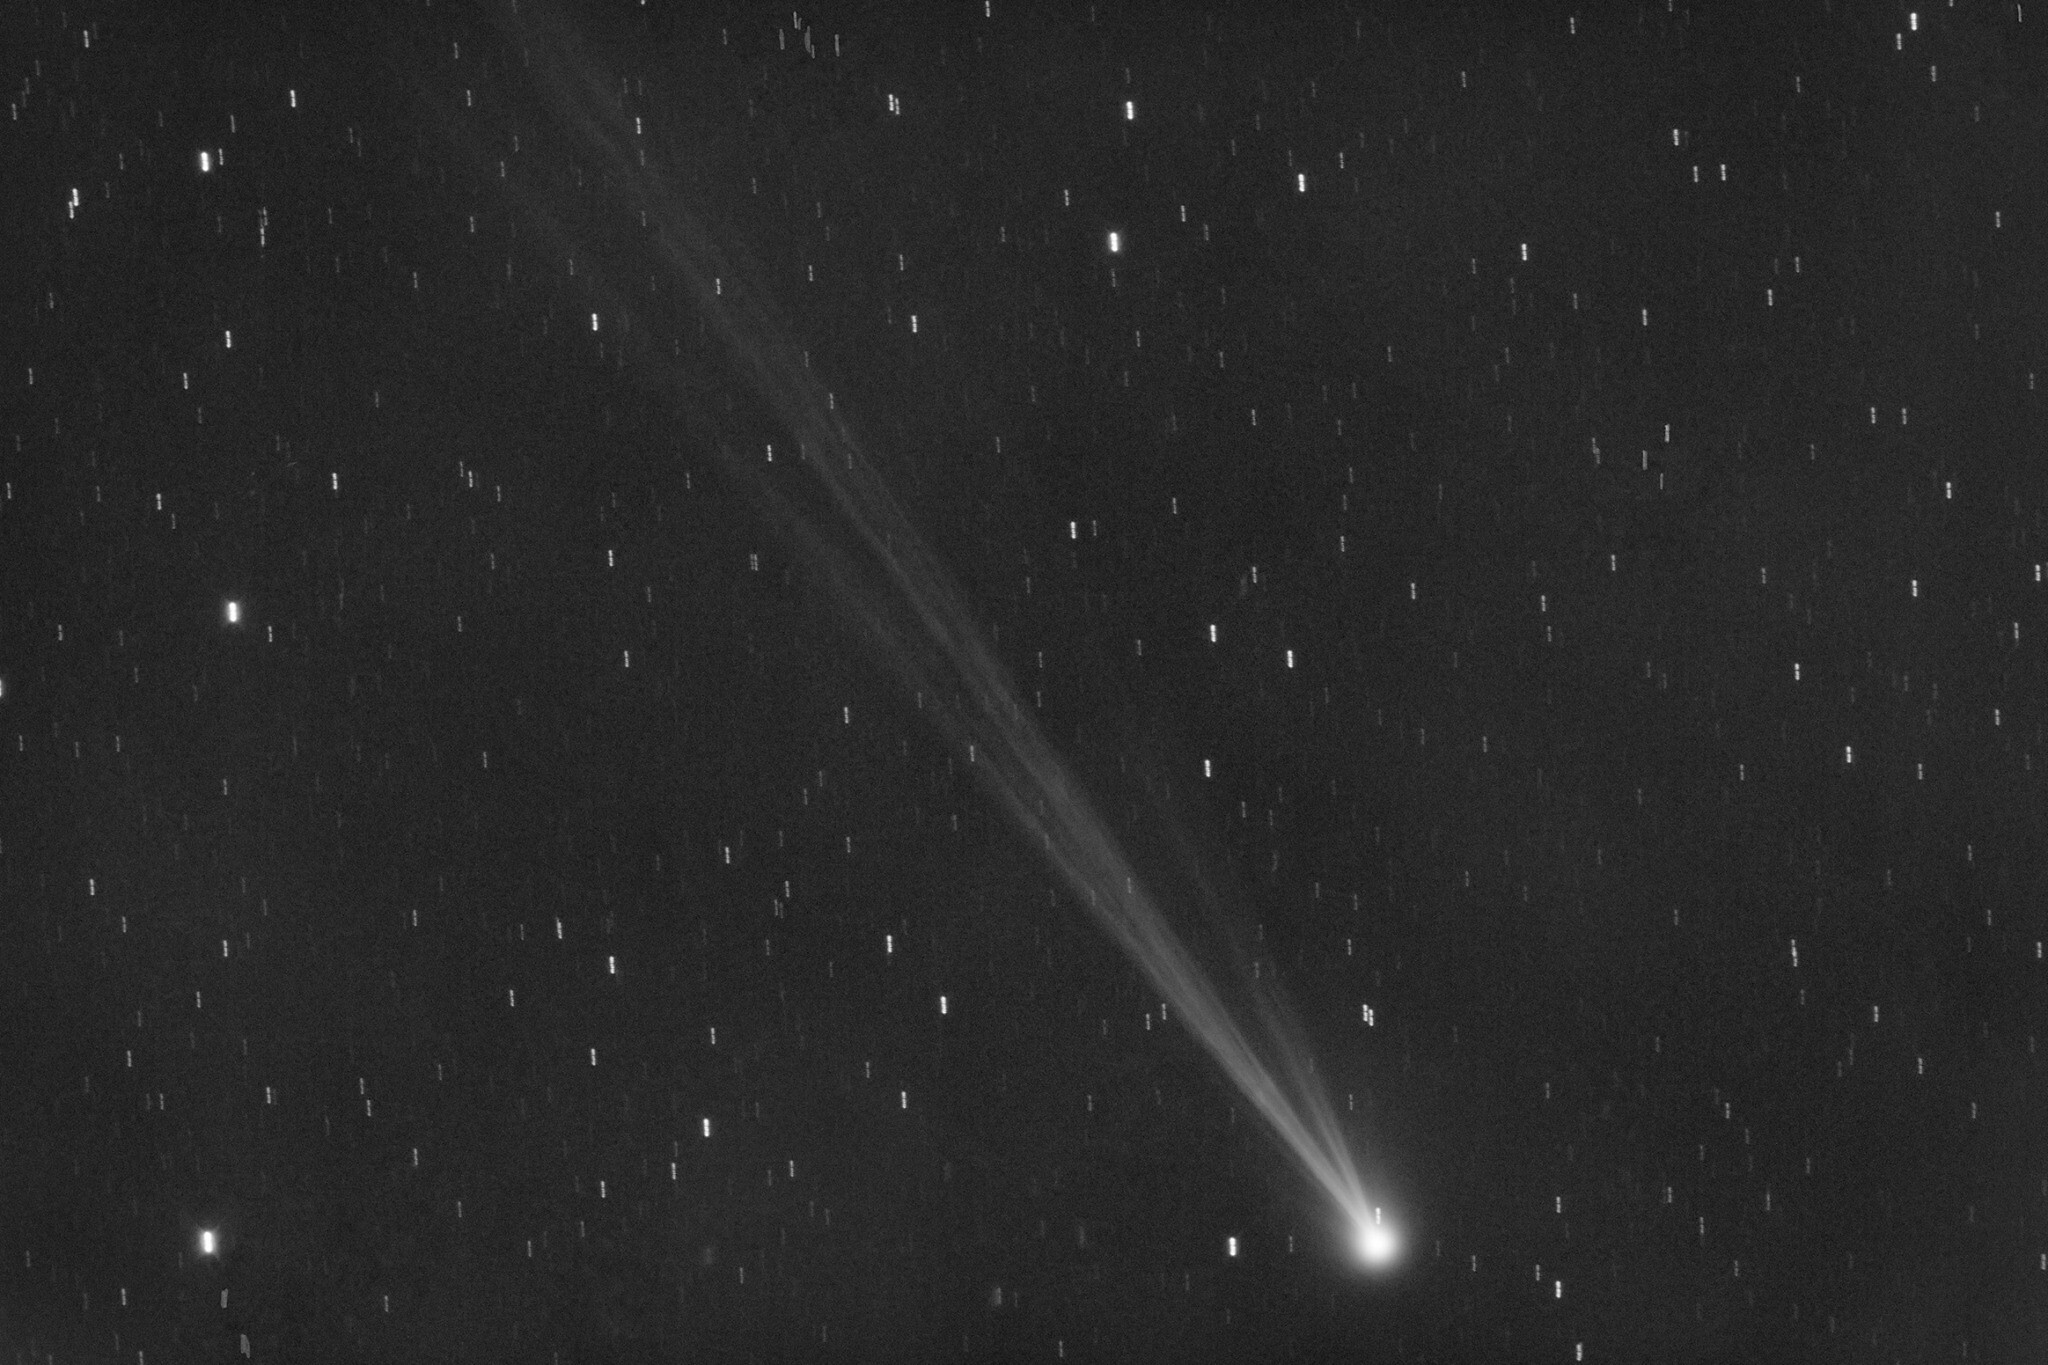 amateur astronomy and comets